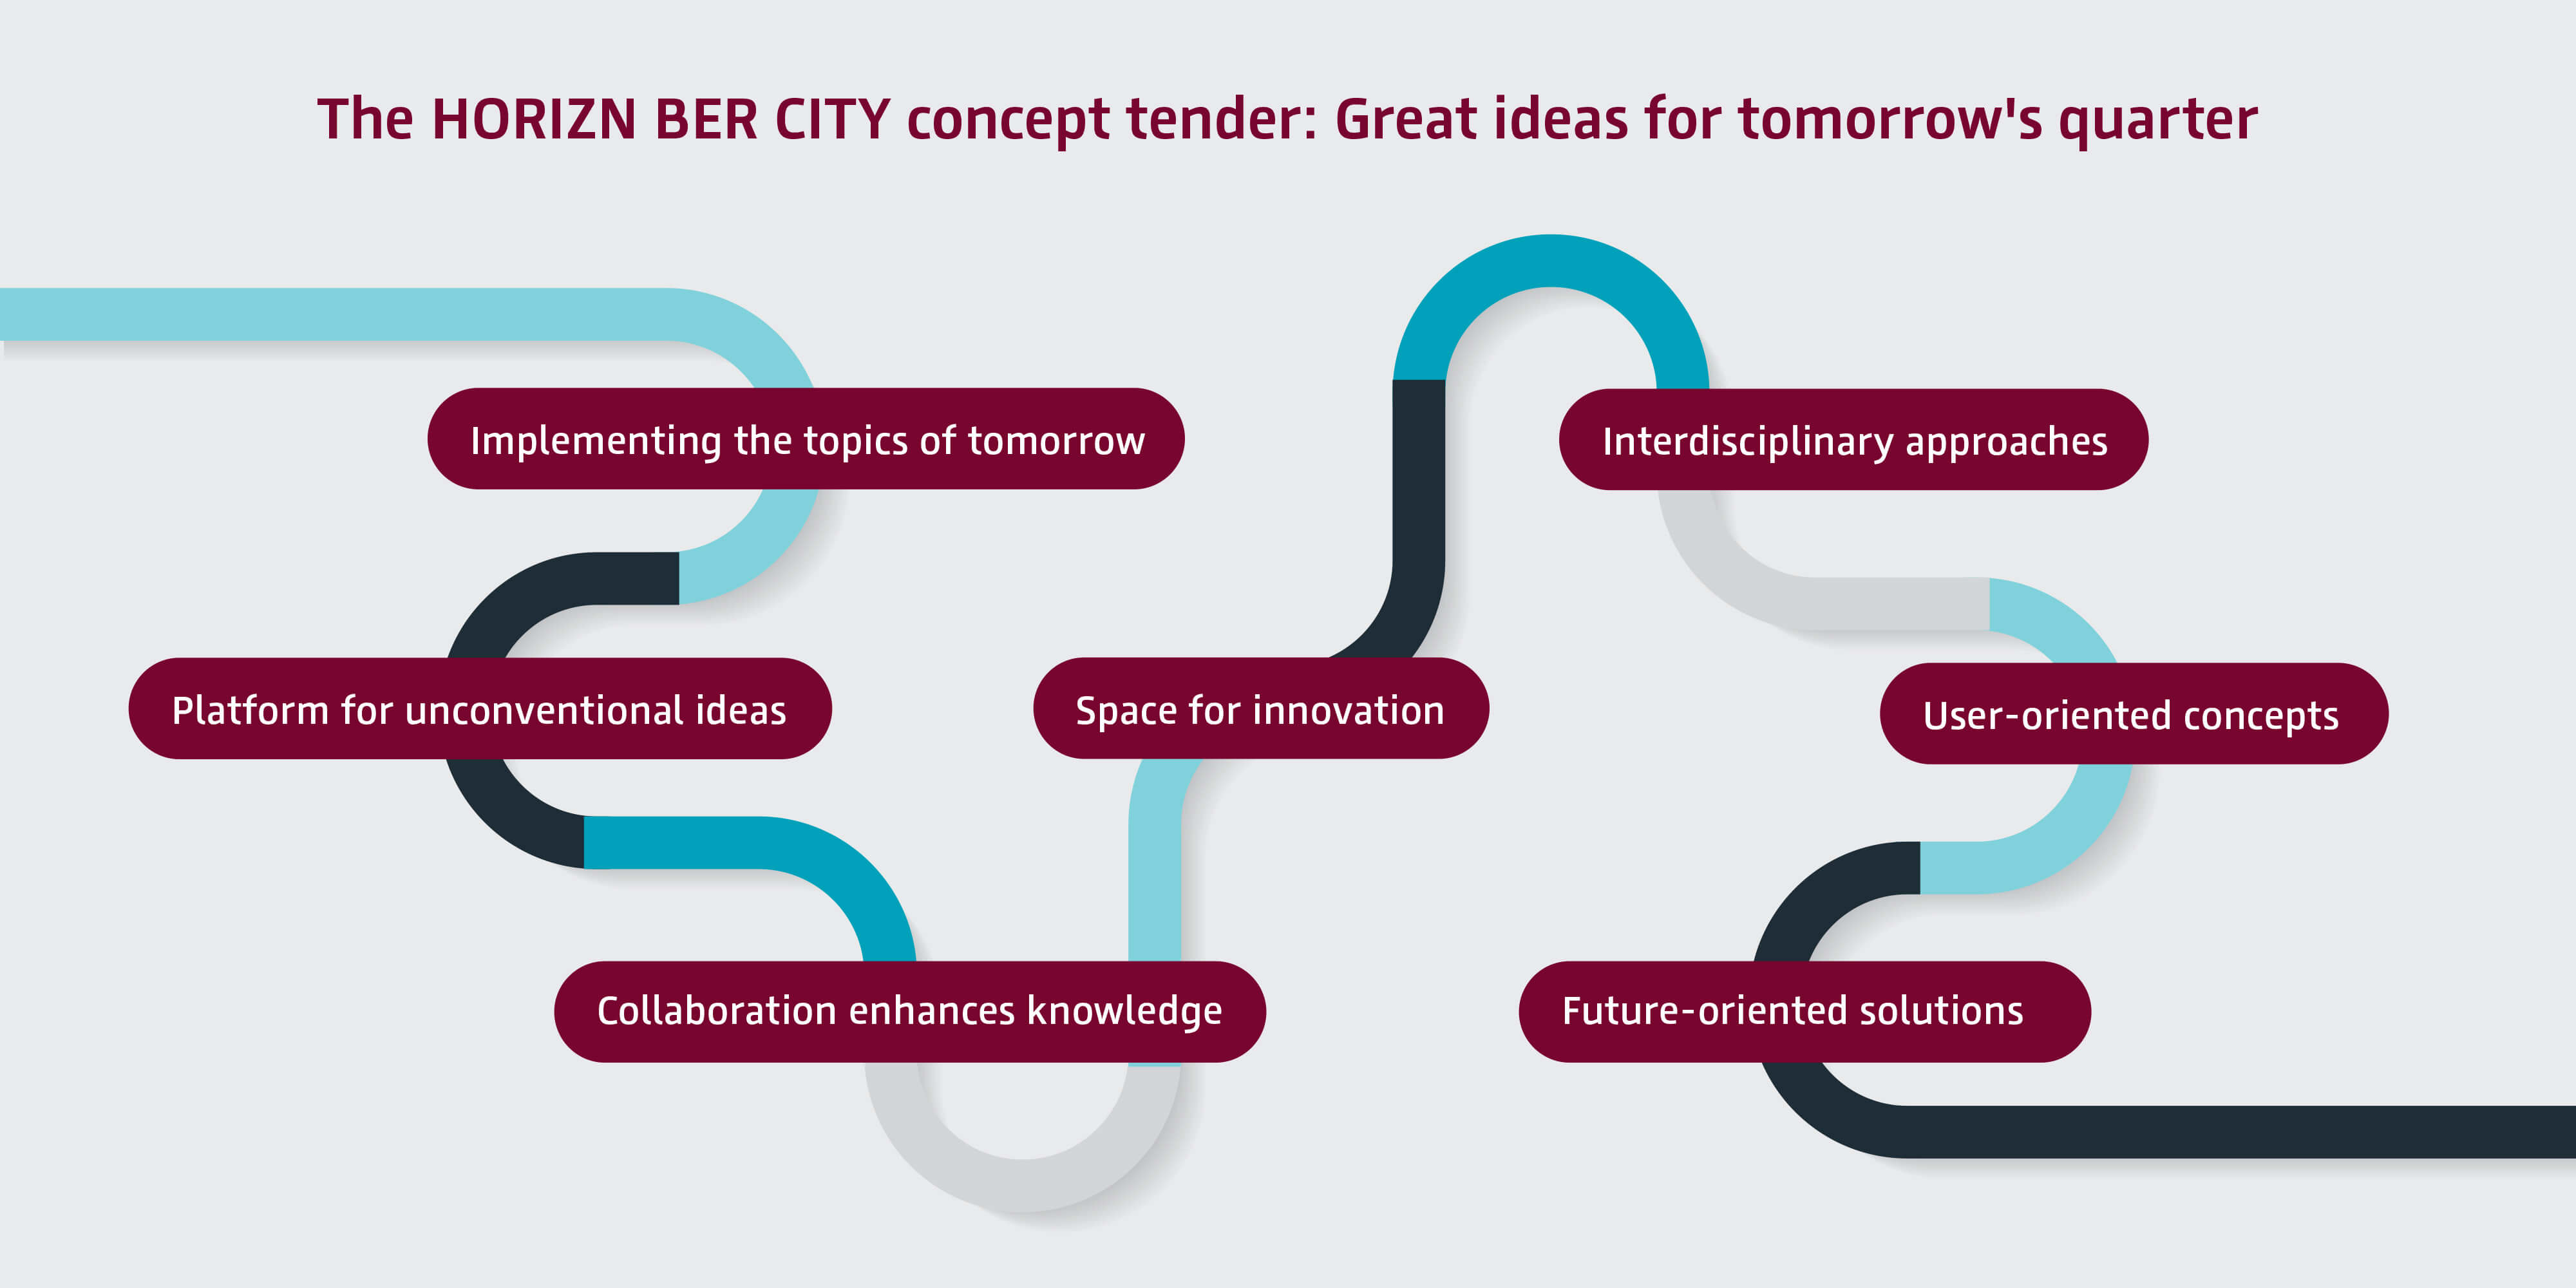 An illustration shows the opportunities of the concept process for HORIZN BER CITY. © Khvost / stock.adobe.com